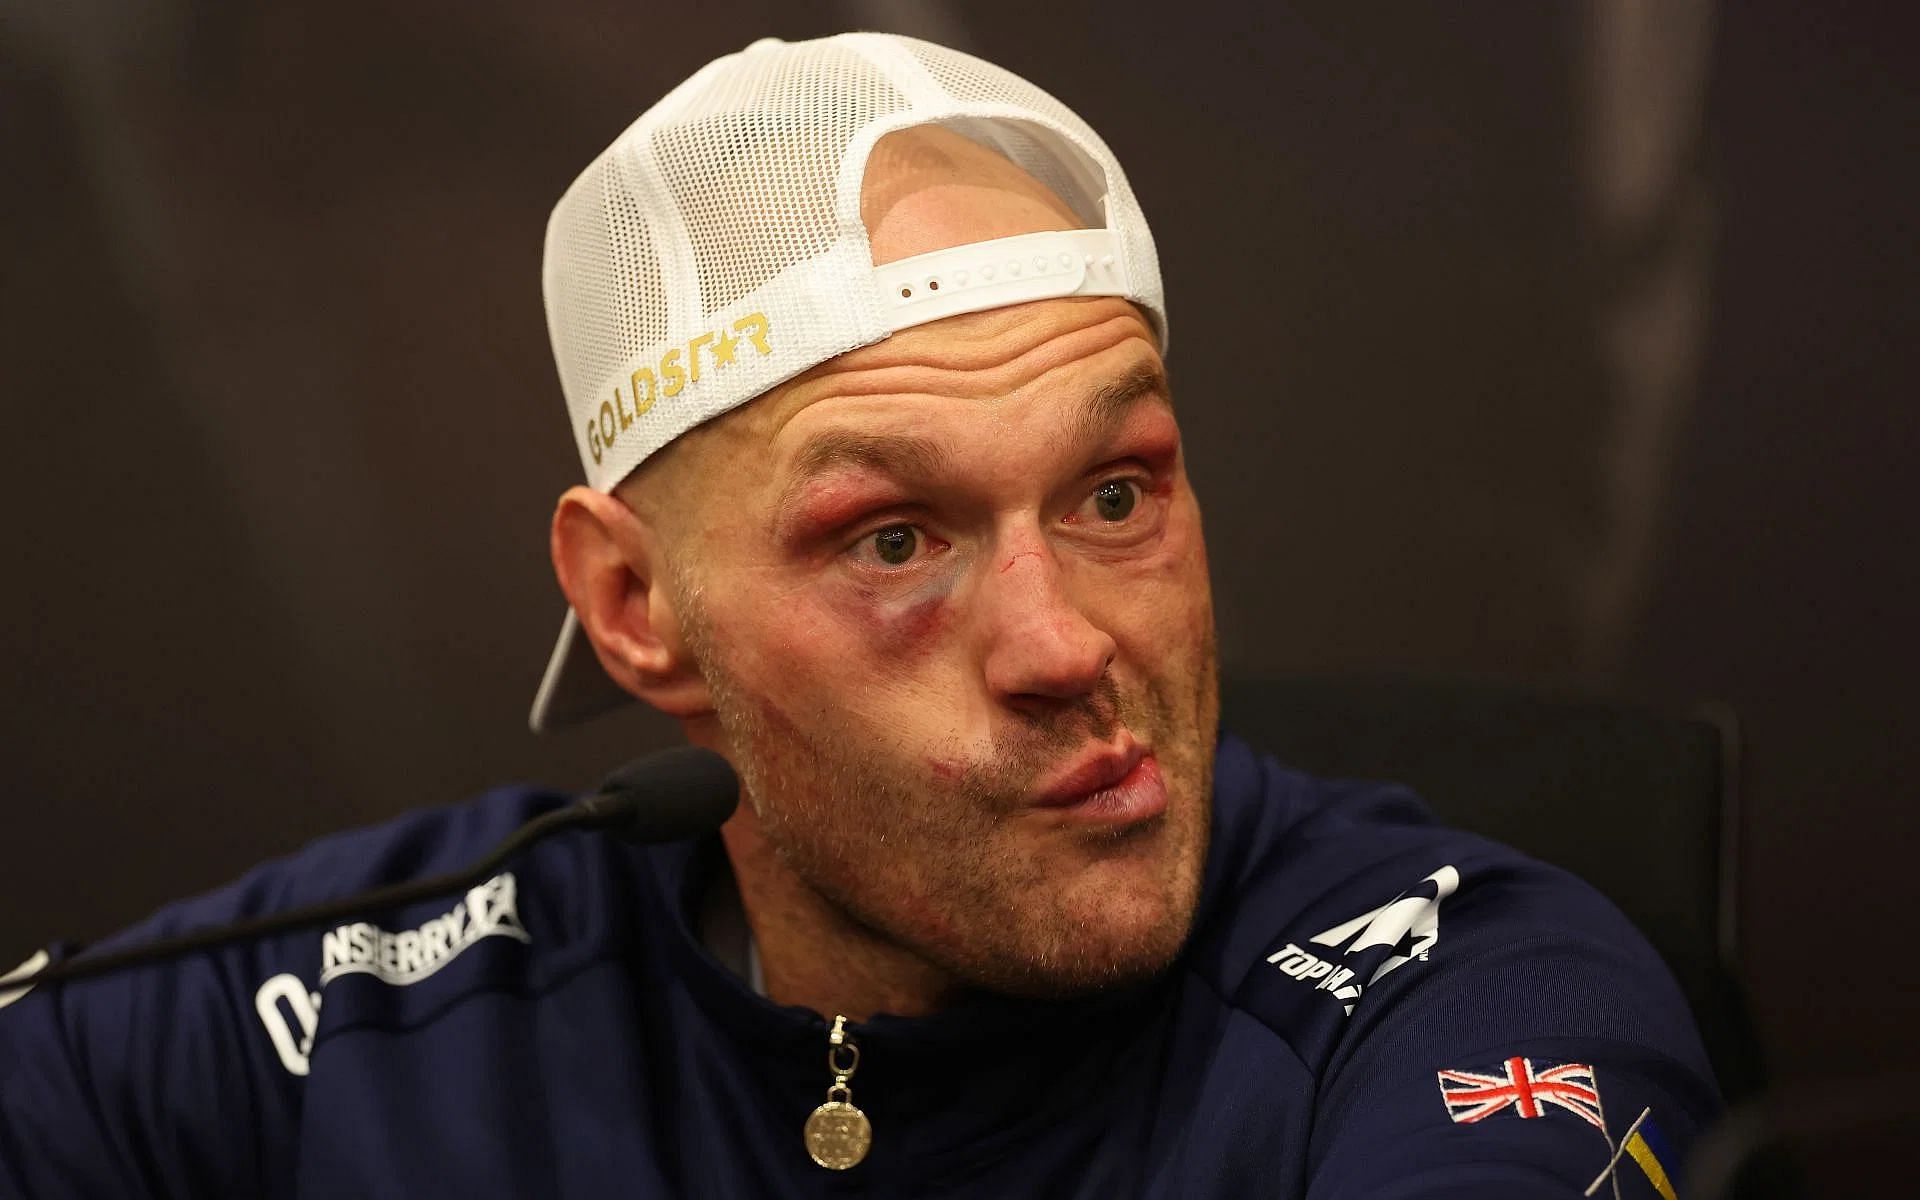 Tyson Fury (pictured) will have some mental hurdles to overcome after losing to Oleksandr Usyk, says Eddie Hearn [Image Courtesy: @GettyImages]